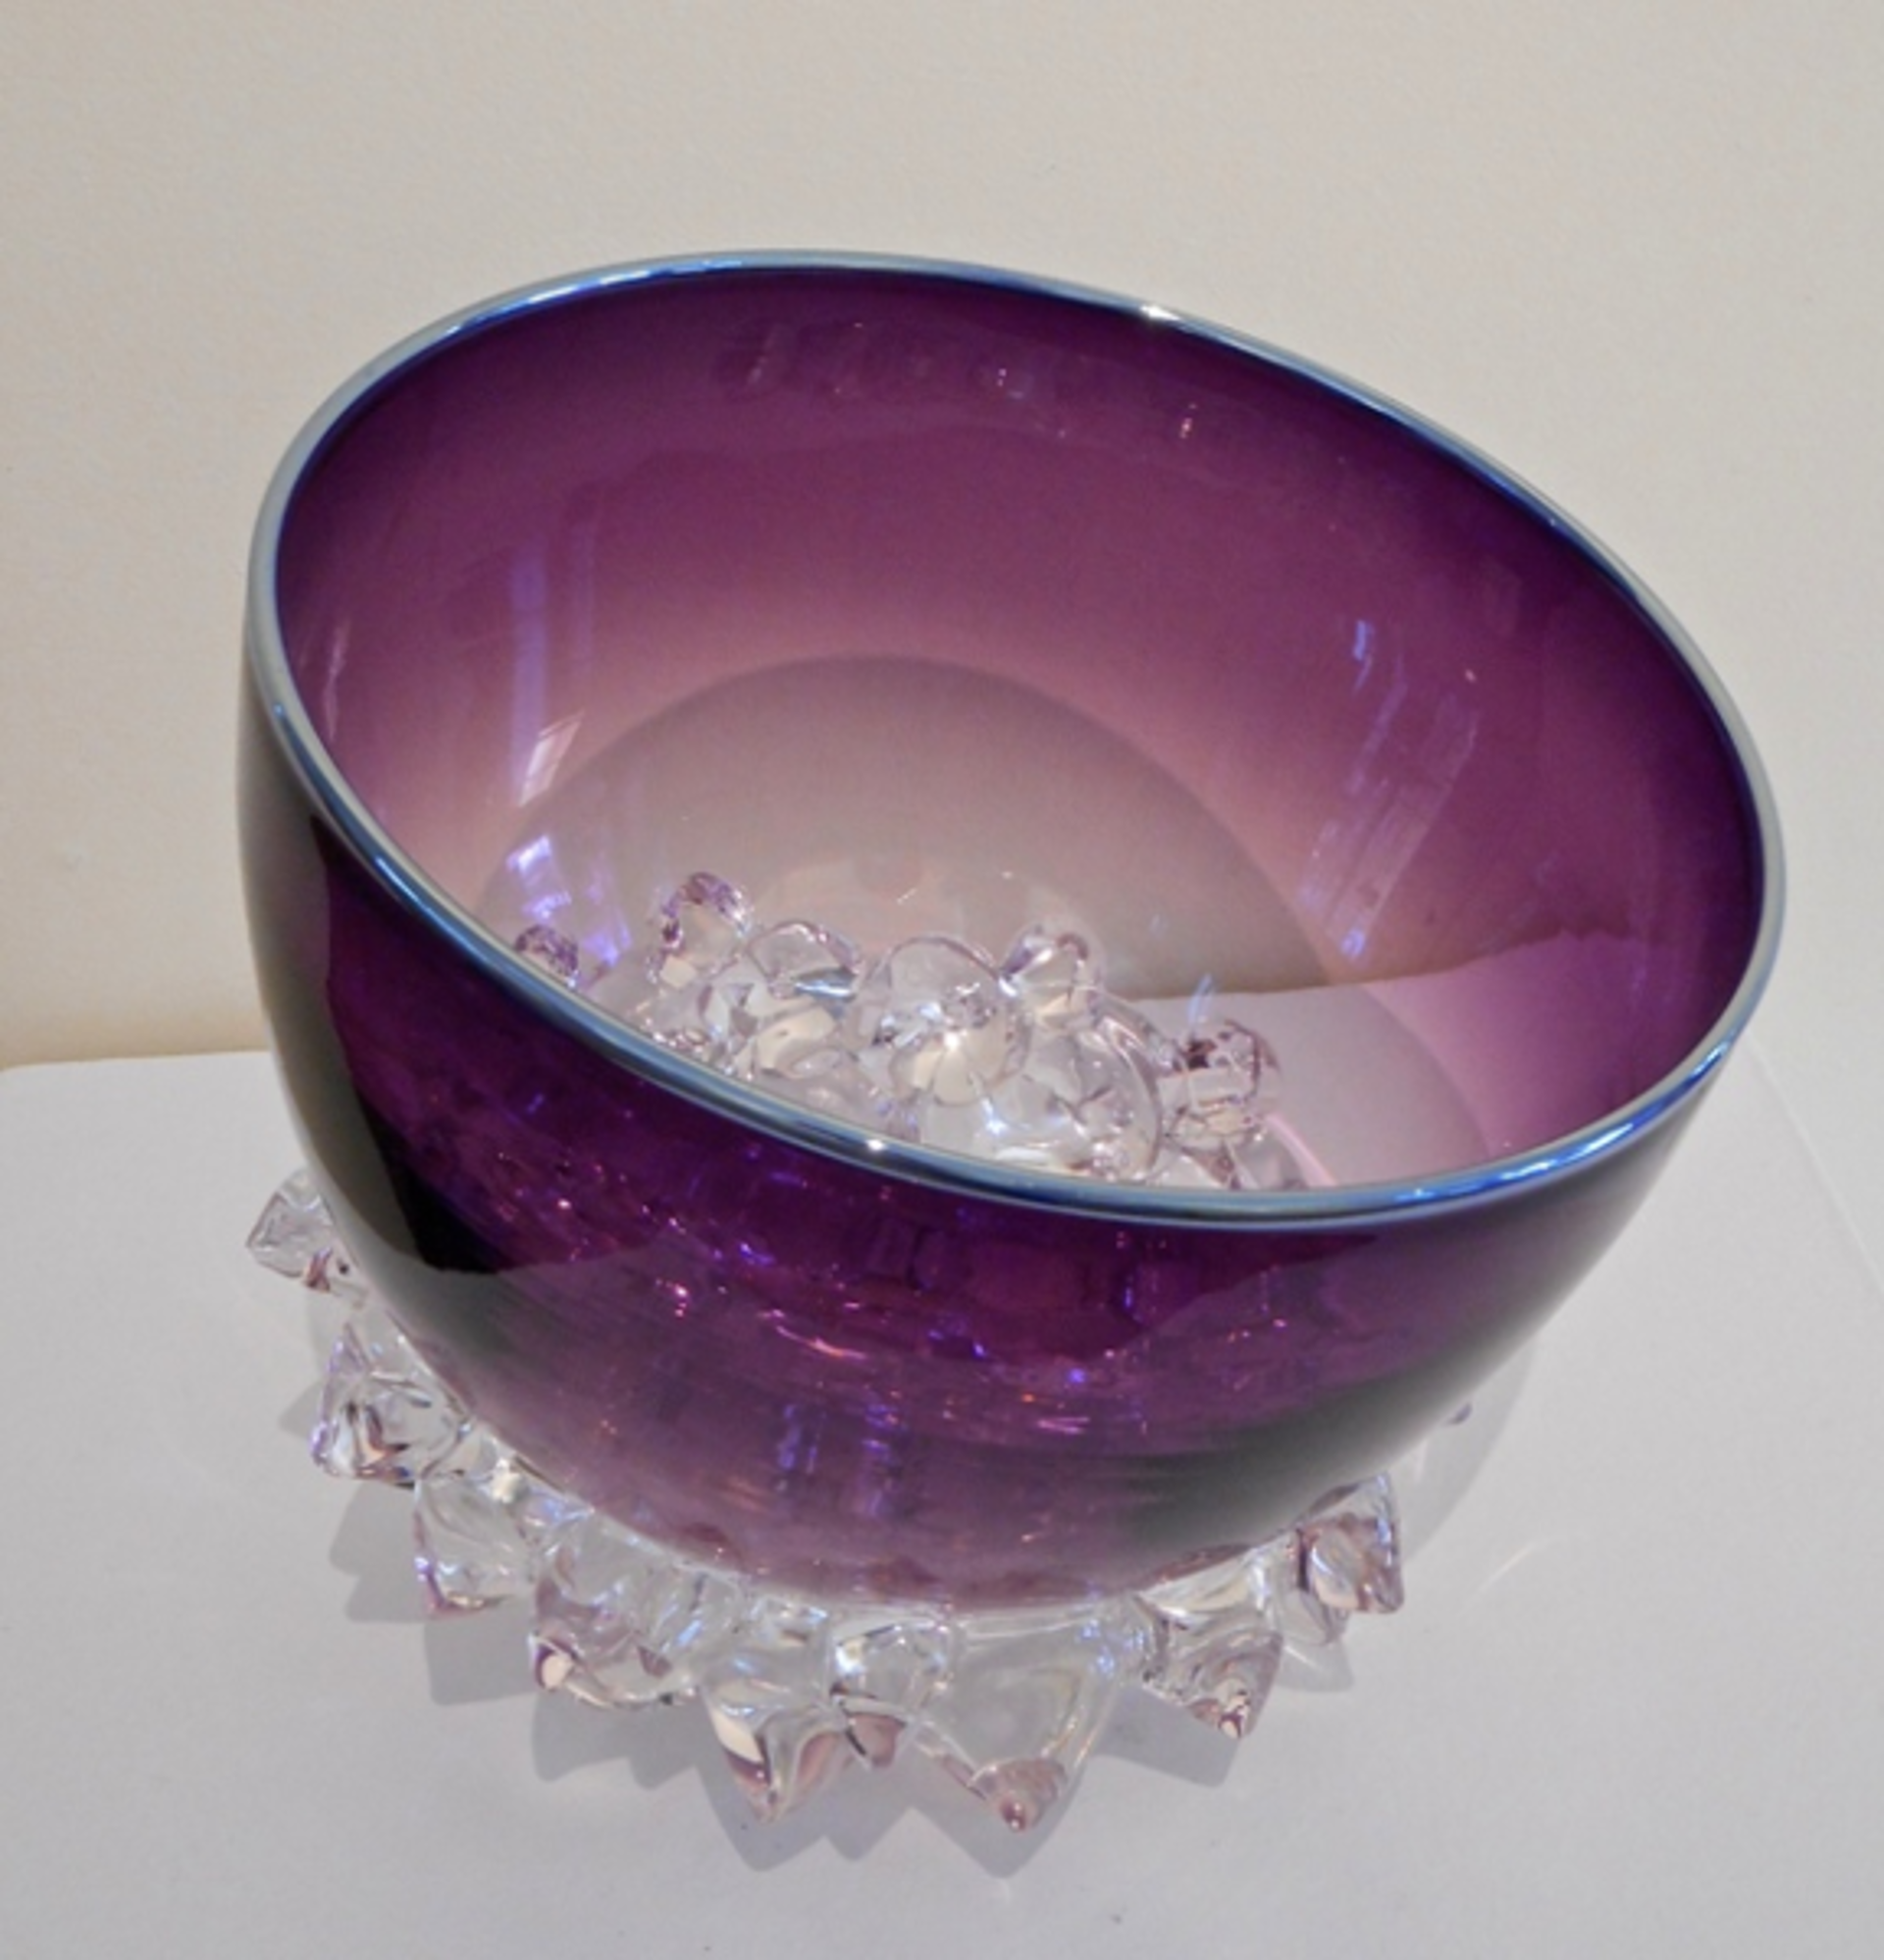 Thorn Vessel (Purple Plum/Silver) by Andrew Madvin